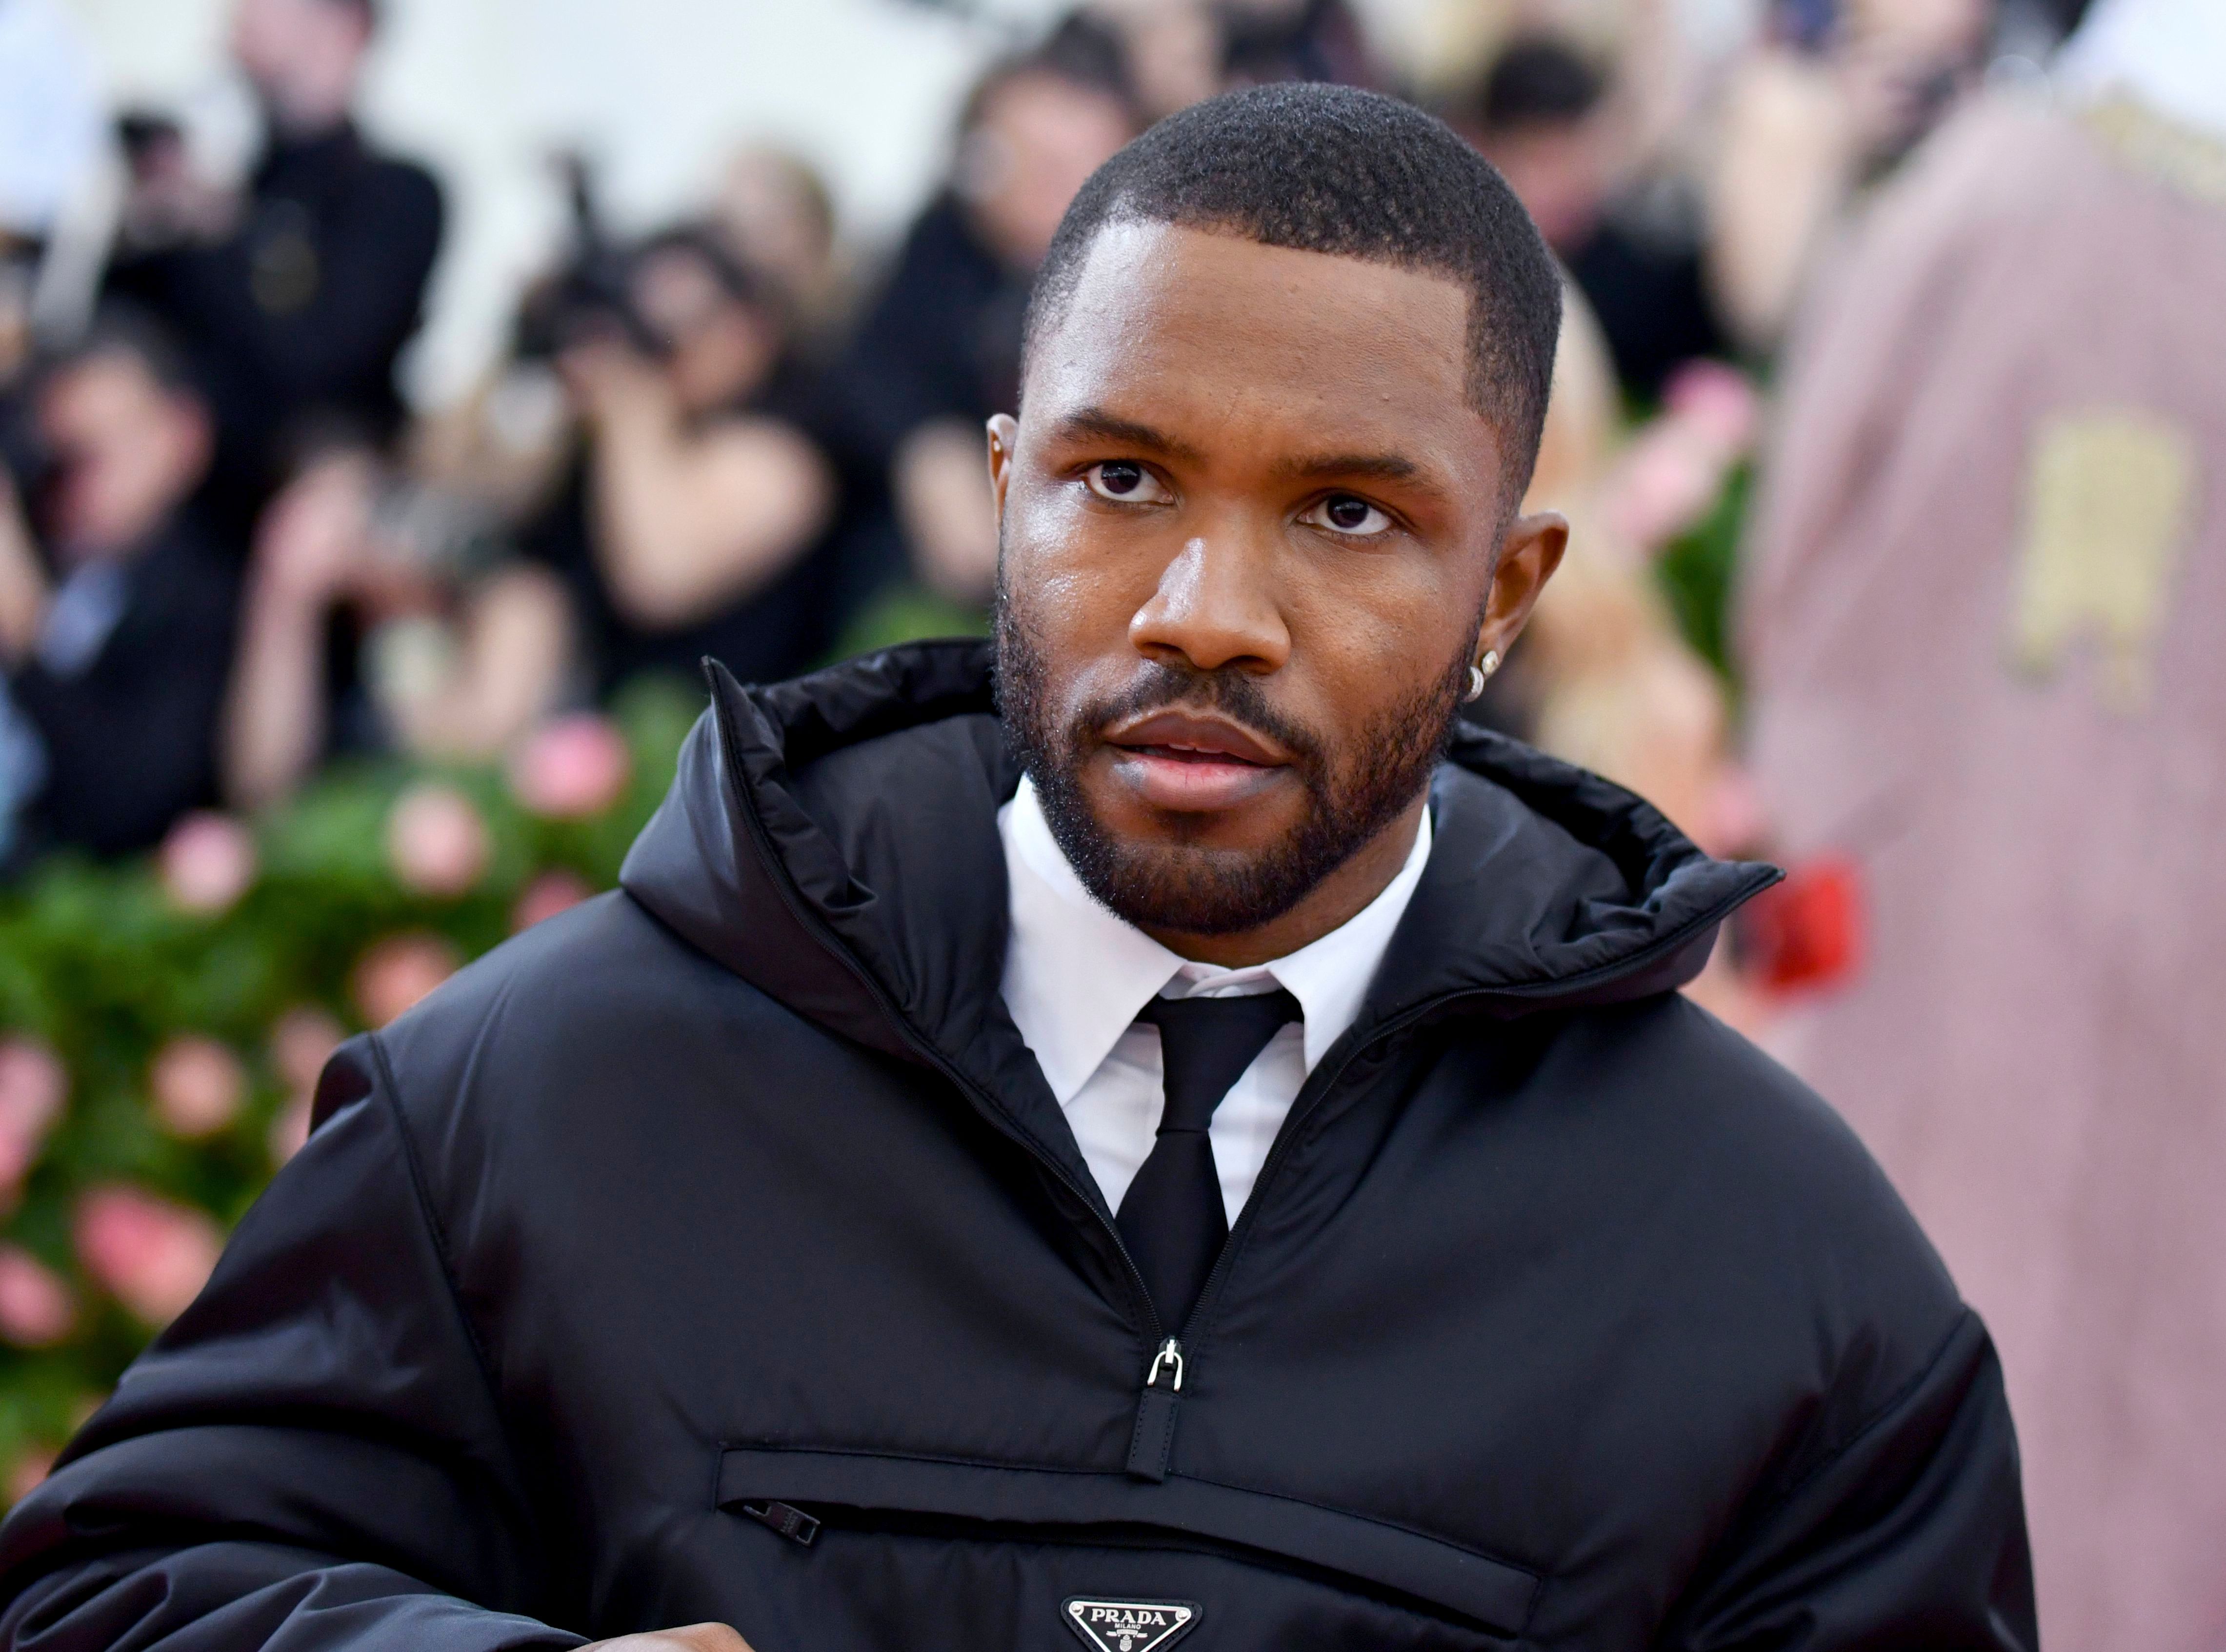 Who Are Frank Ocean's Siblings? His Brother Died in a Car Accident